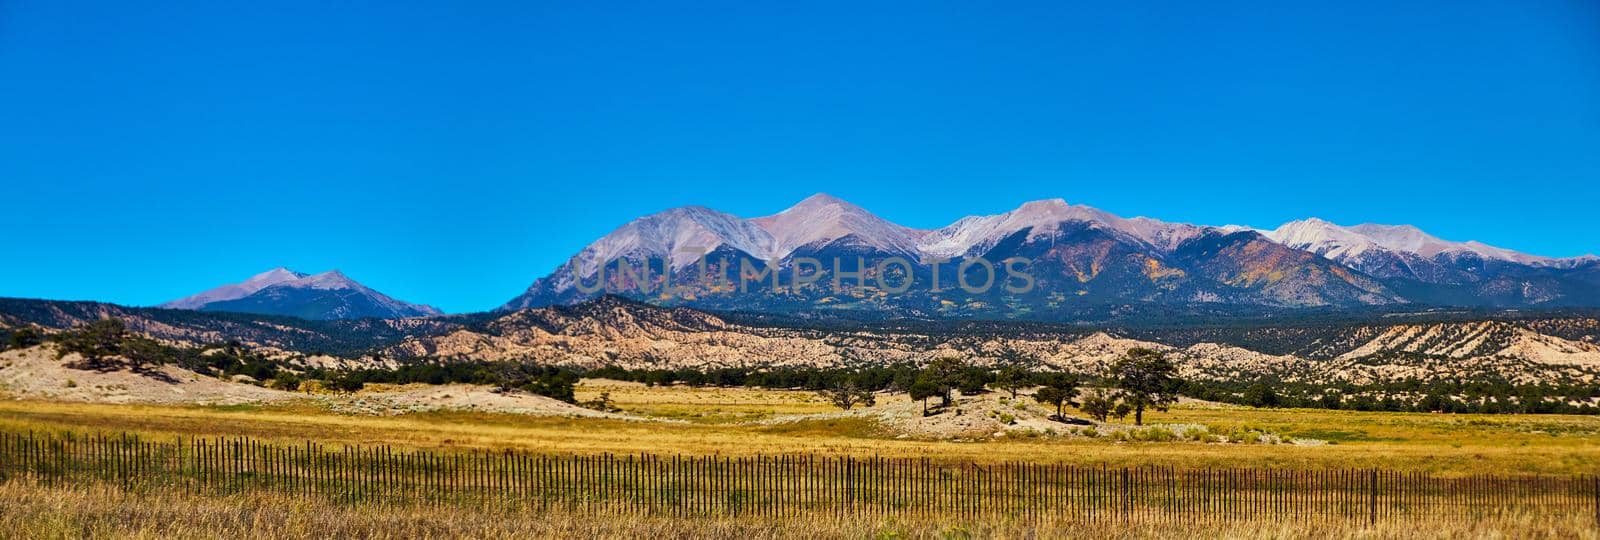 Panorama of midwest mountain range in desert with simple wood fence in foreground by njproductions